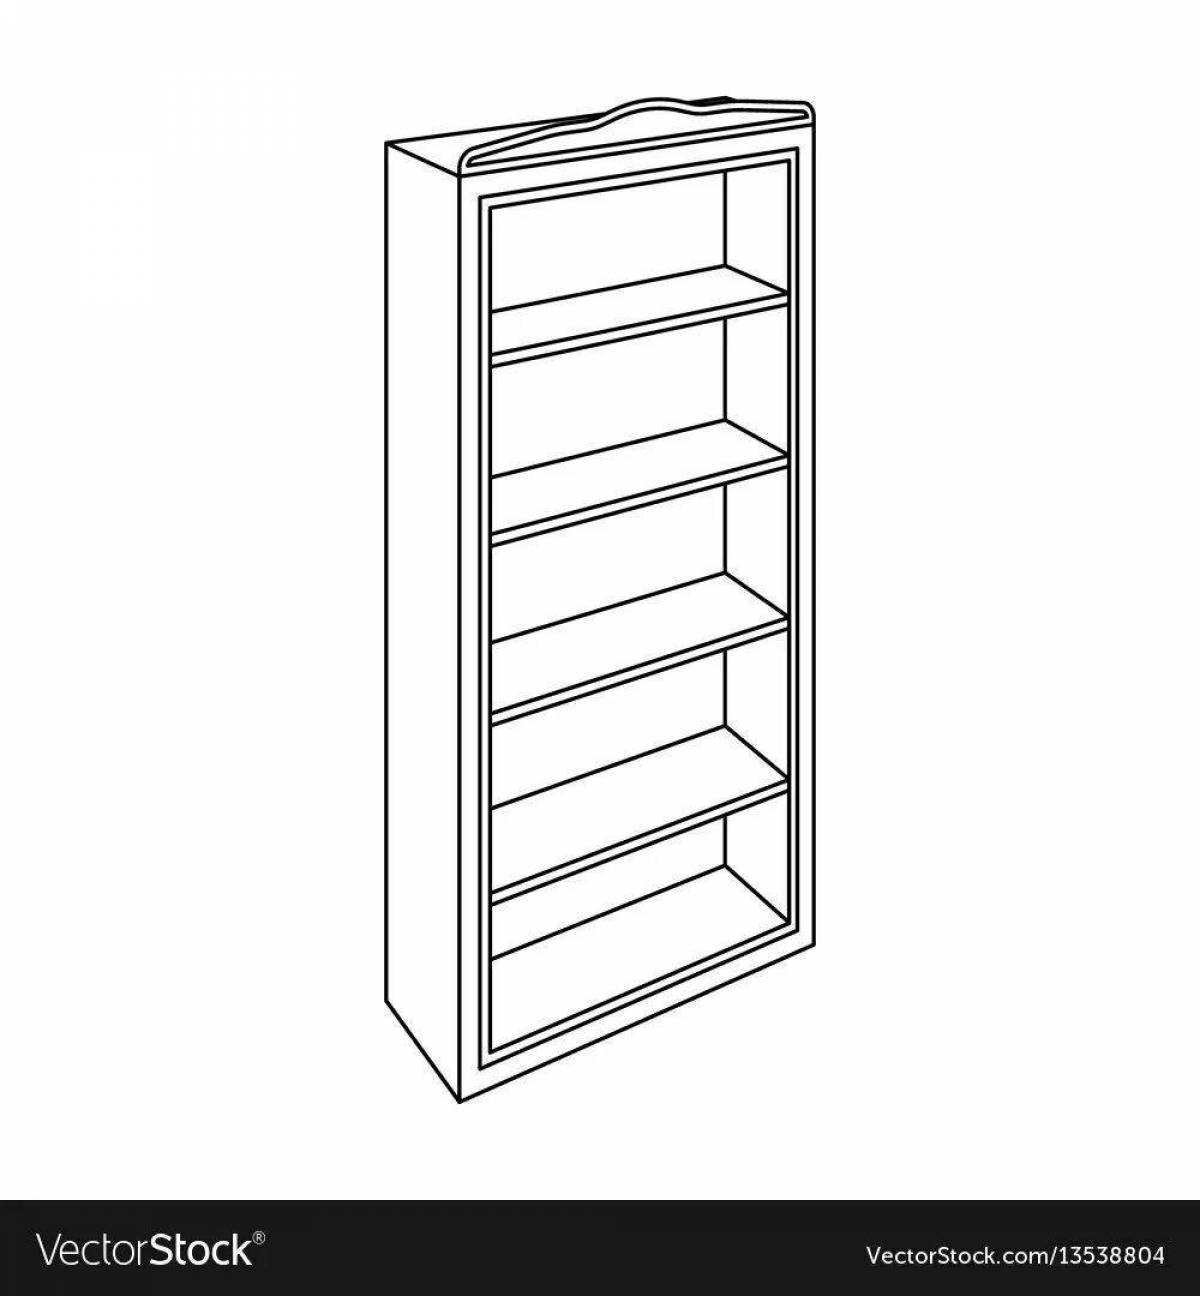 Peaceful bookshelf for coloring